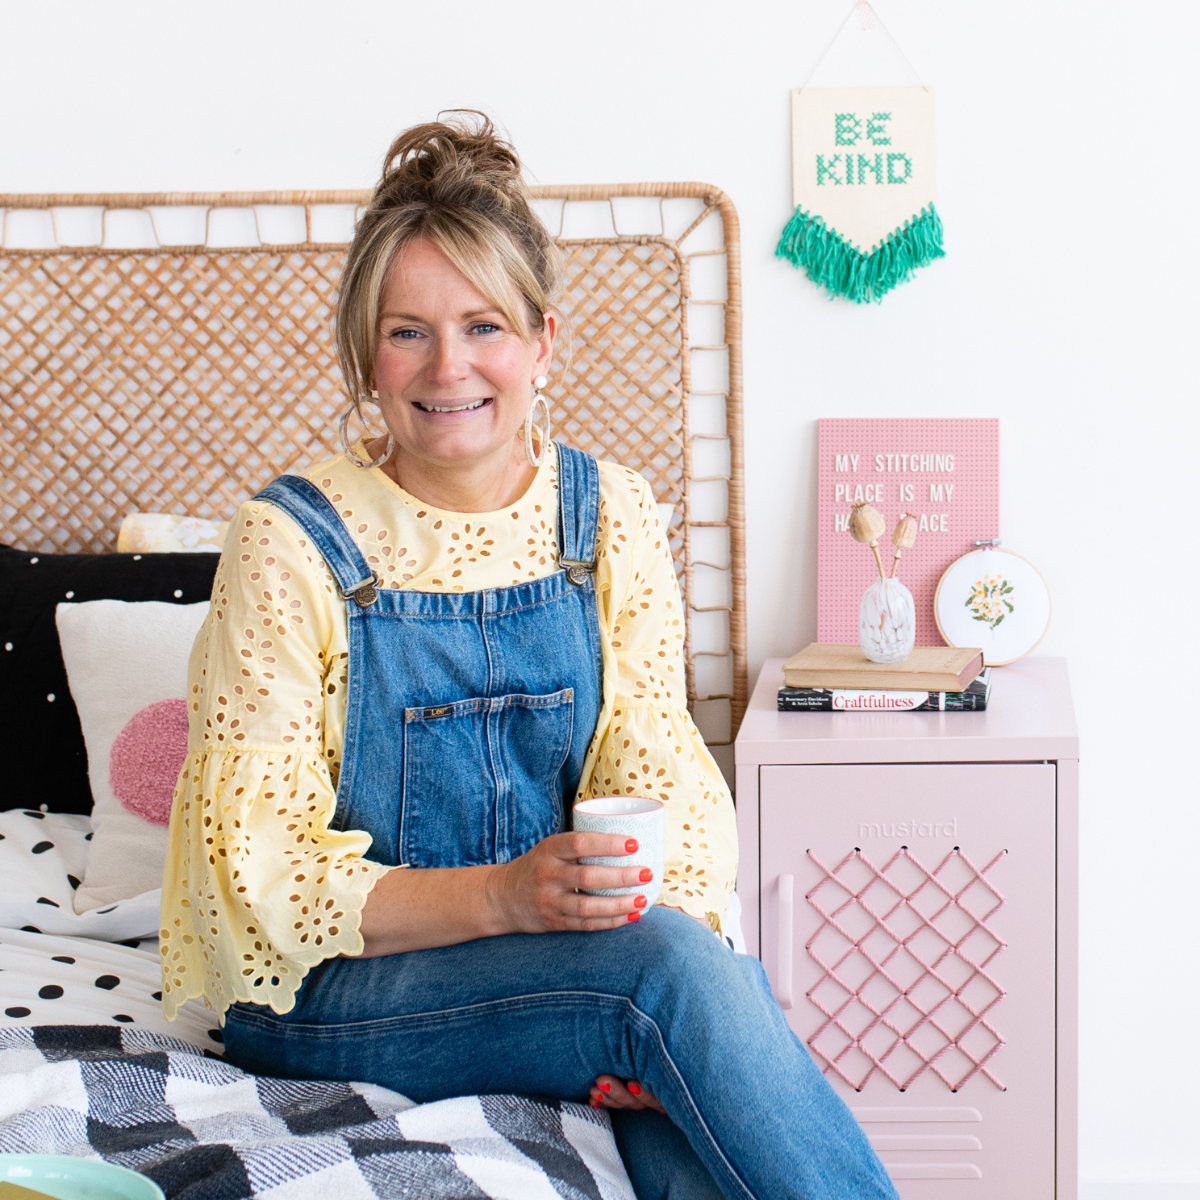 Chloe sits on a bed next to a blush cross-stitched locker. She is wearing denim dungarees with a ruffled yellow shirt and hoop earrings. She is holding a cup of tea.